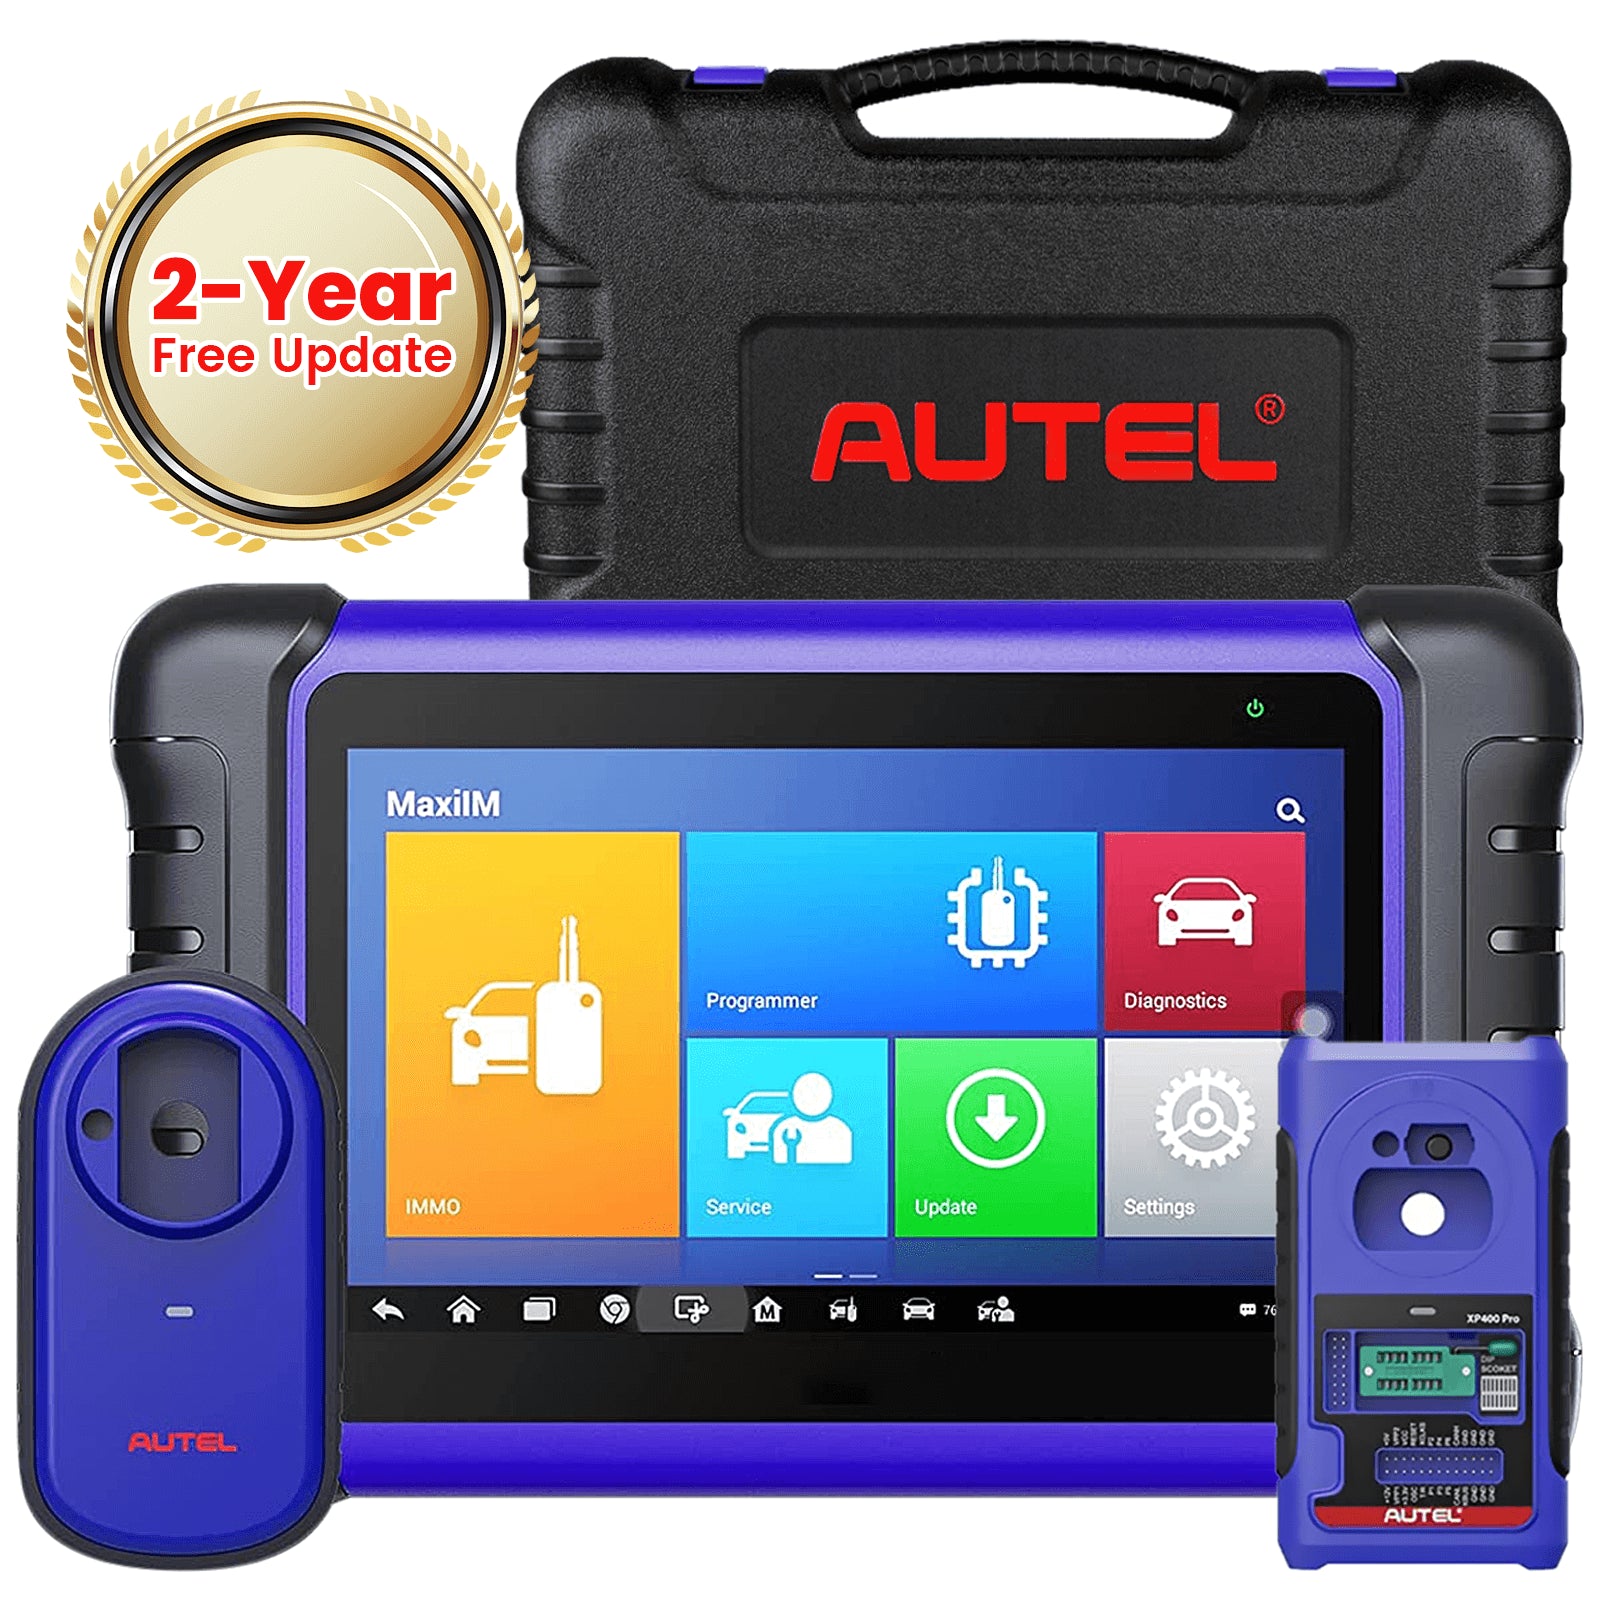 [2 Year Free Update] Autel MaxiIM IM508 Advanced IMMO Key Fob Programming Tool with XP200 Programmer, Automotive Full System Diagnostic Tool, 25+ Services